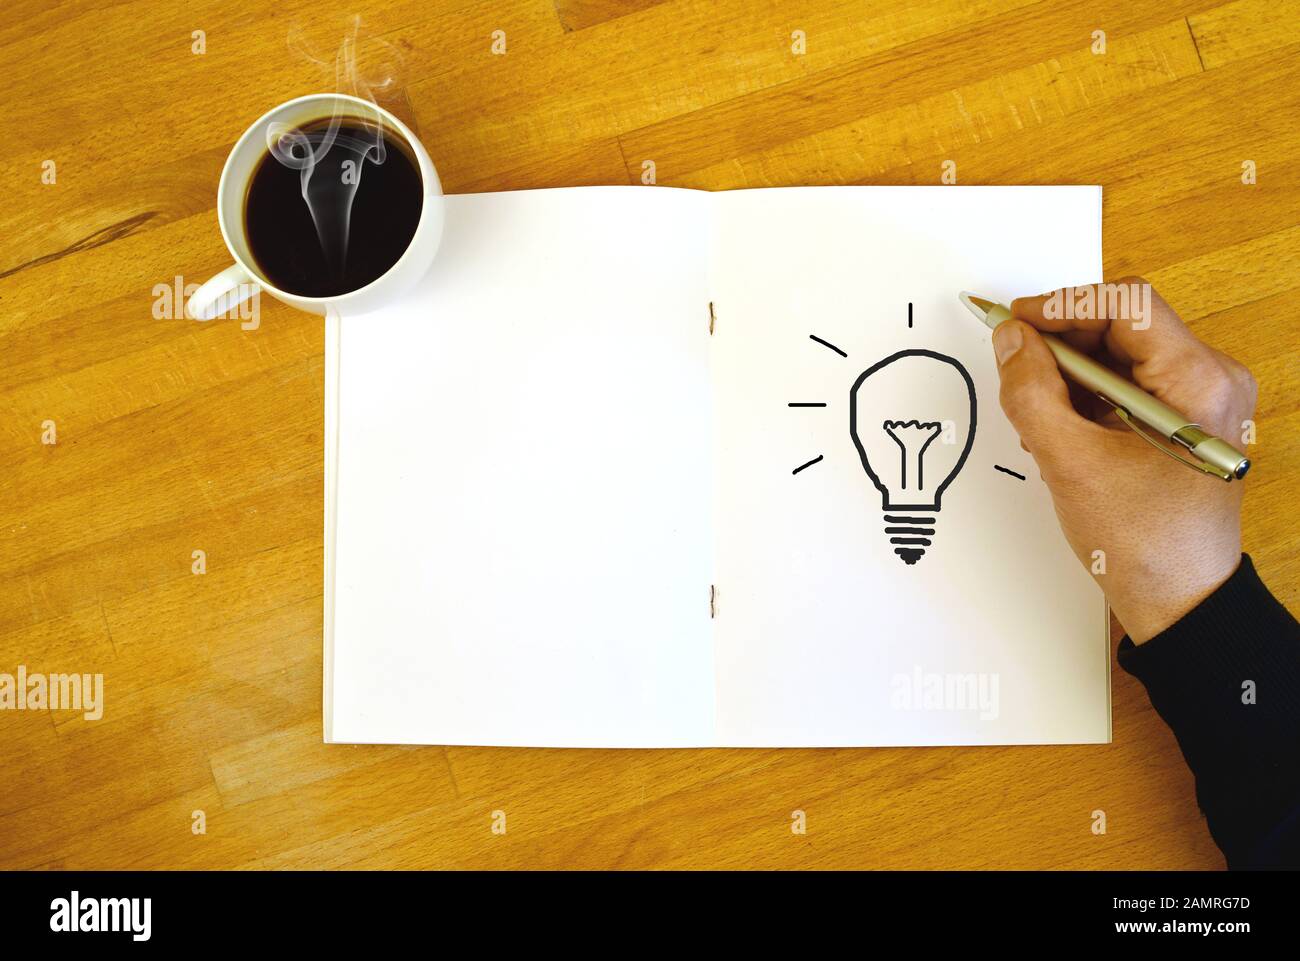 Brainstorming on a desk with paper and coffee, a hand drawing a lamp symbol Stock Photo